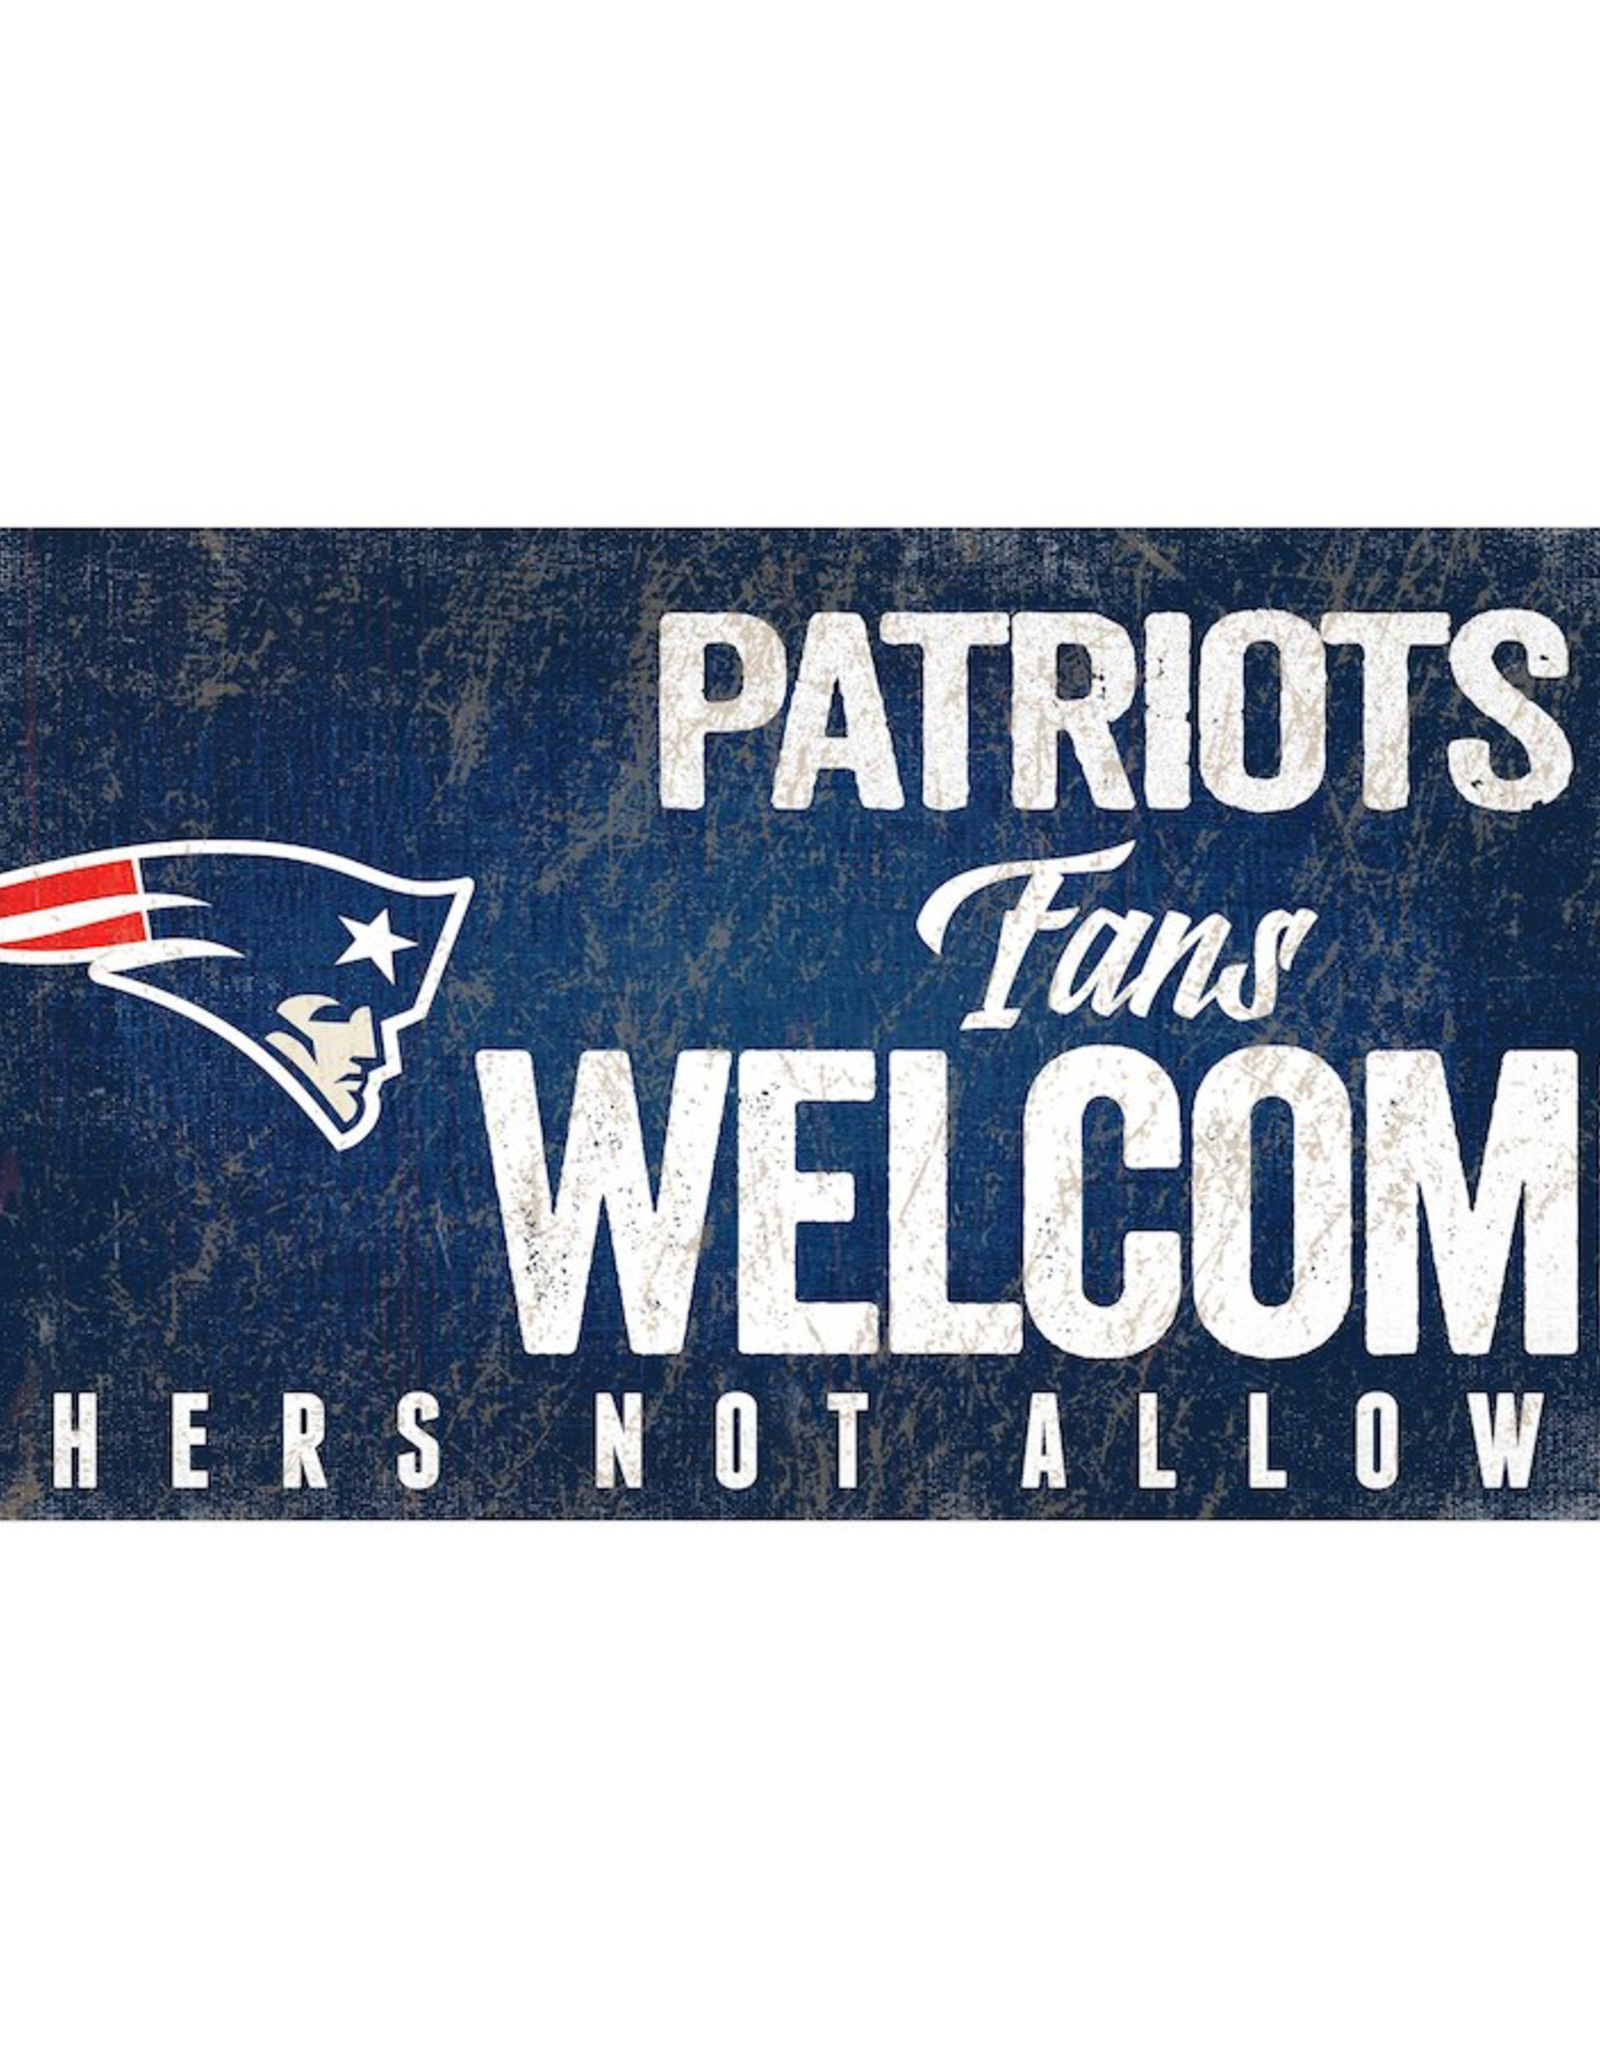 FAN CREATIONS New England Patriots Fans Welcome Wood Sign